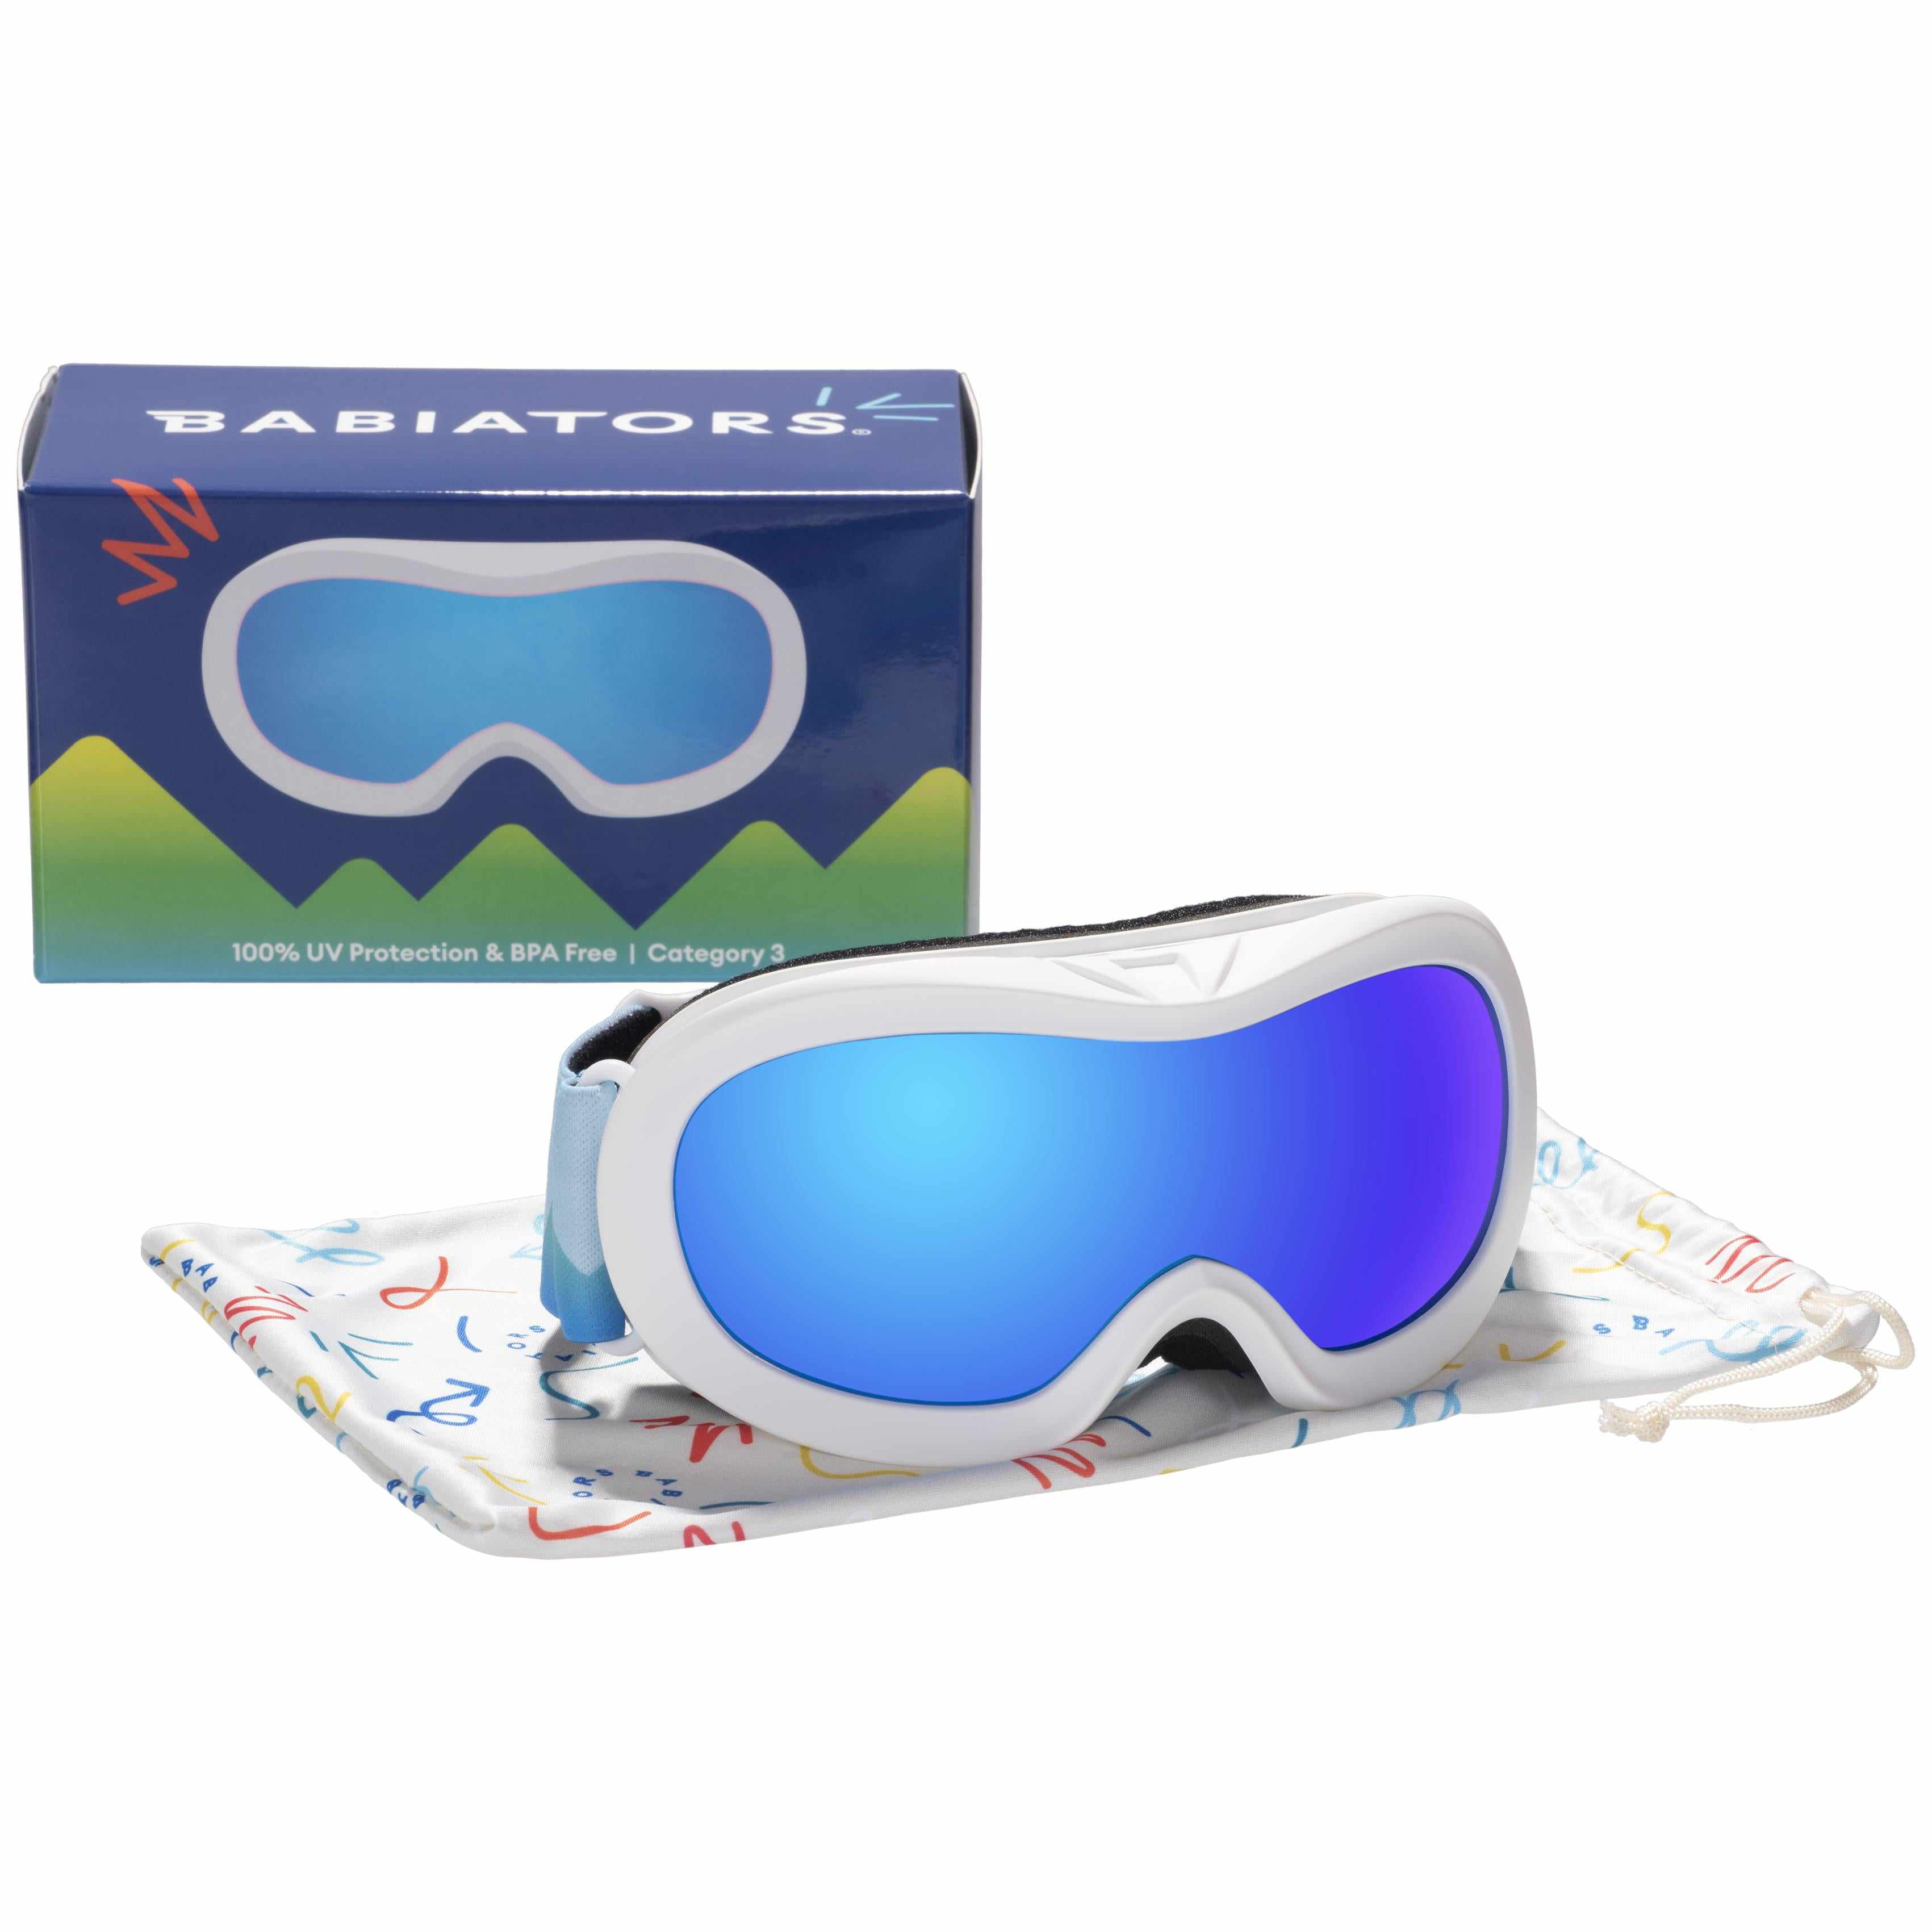 NEVICA BANFF LENS Adults Ski Snow Winter Sports Spare Blue Lens Replacement  £10.99 - PicClick UK